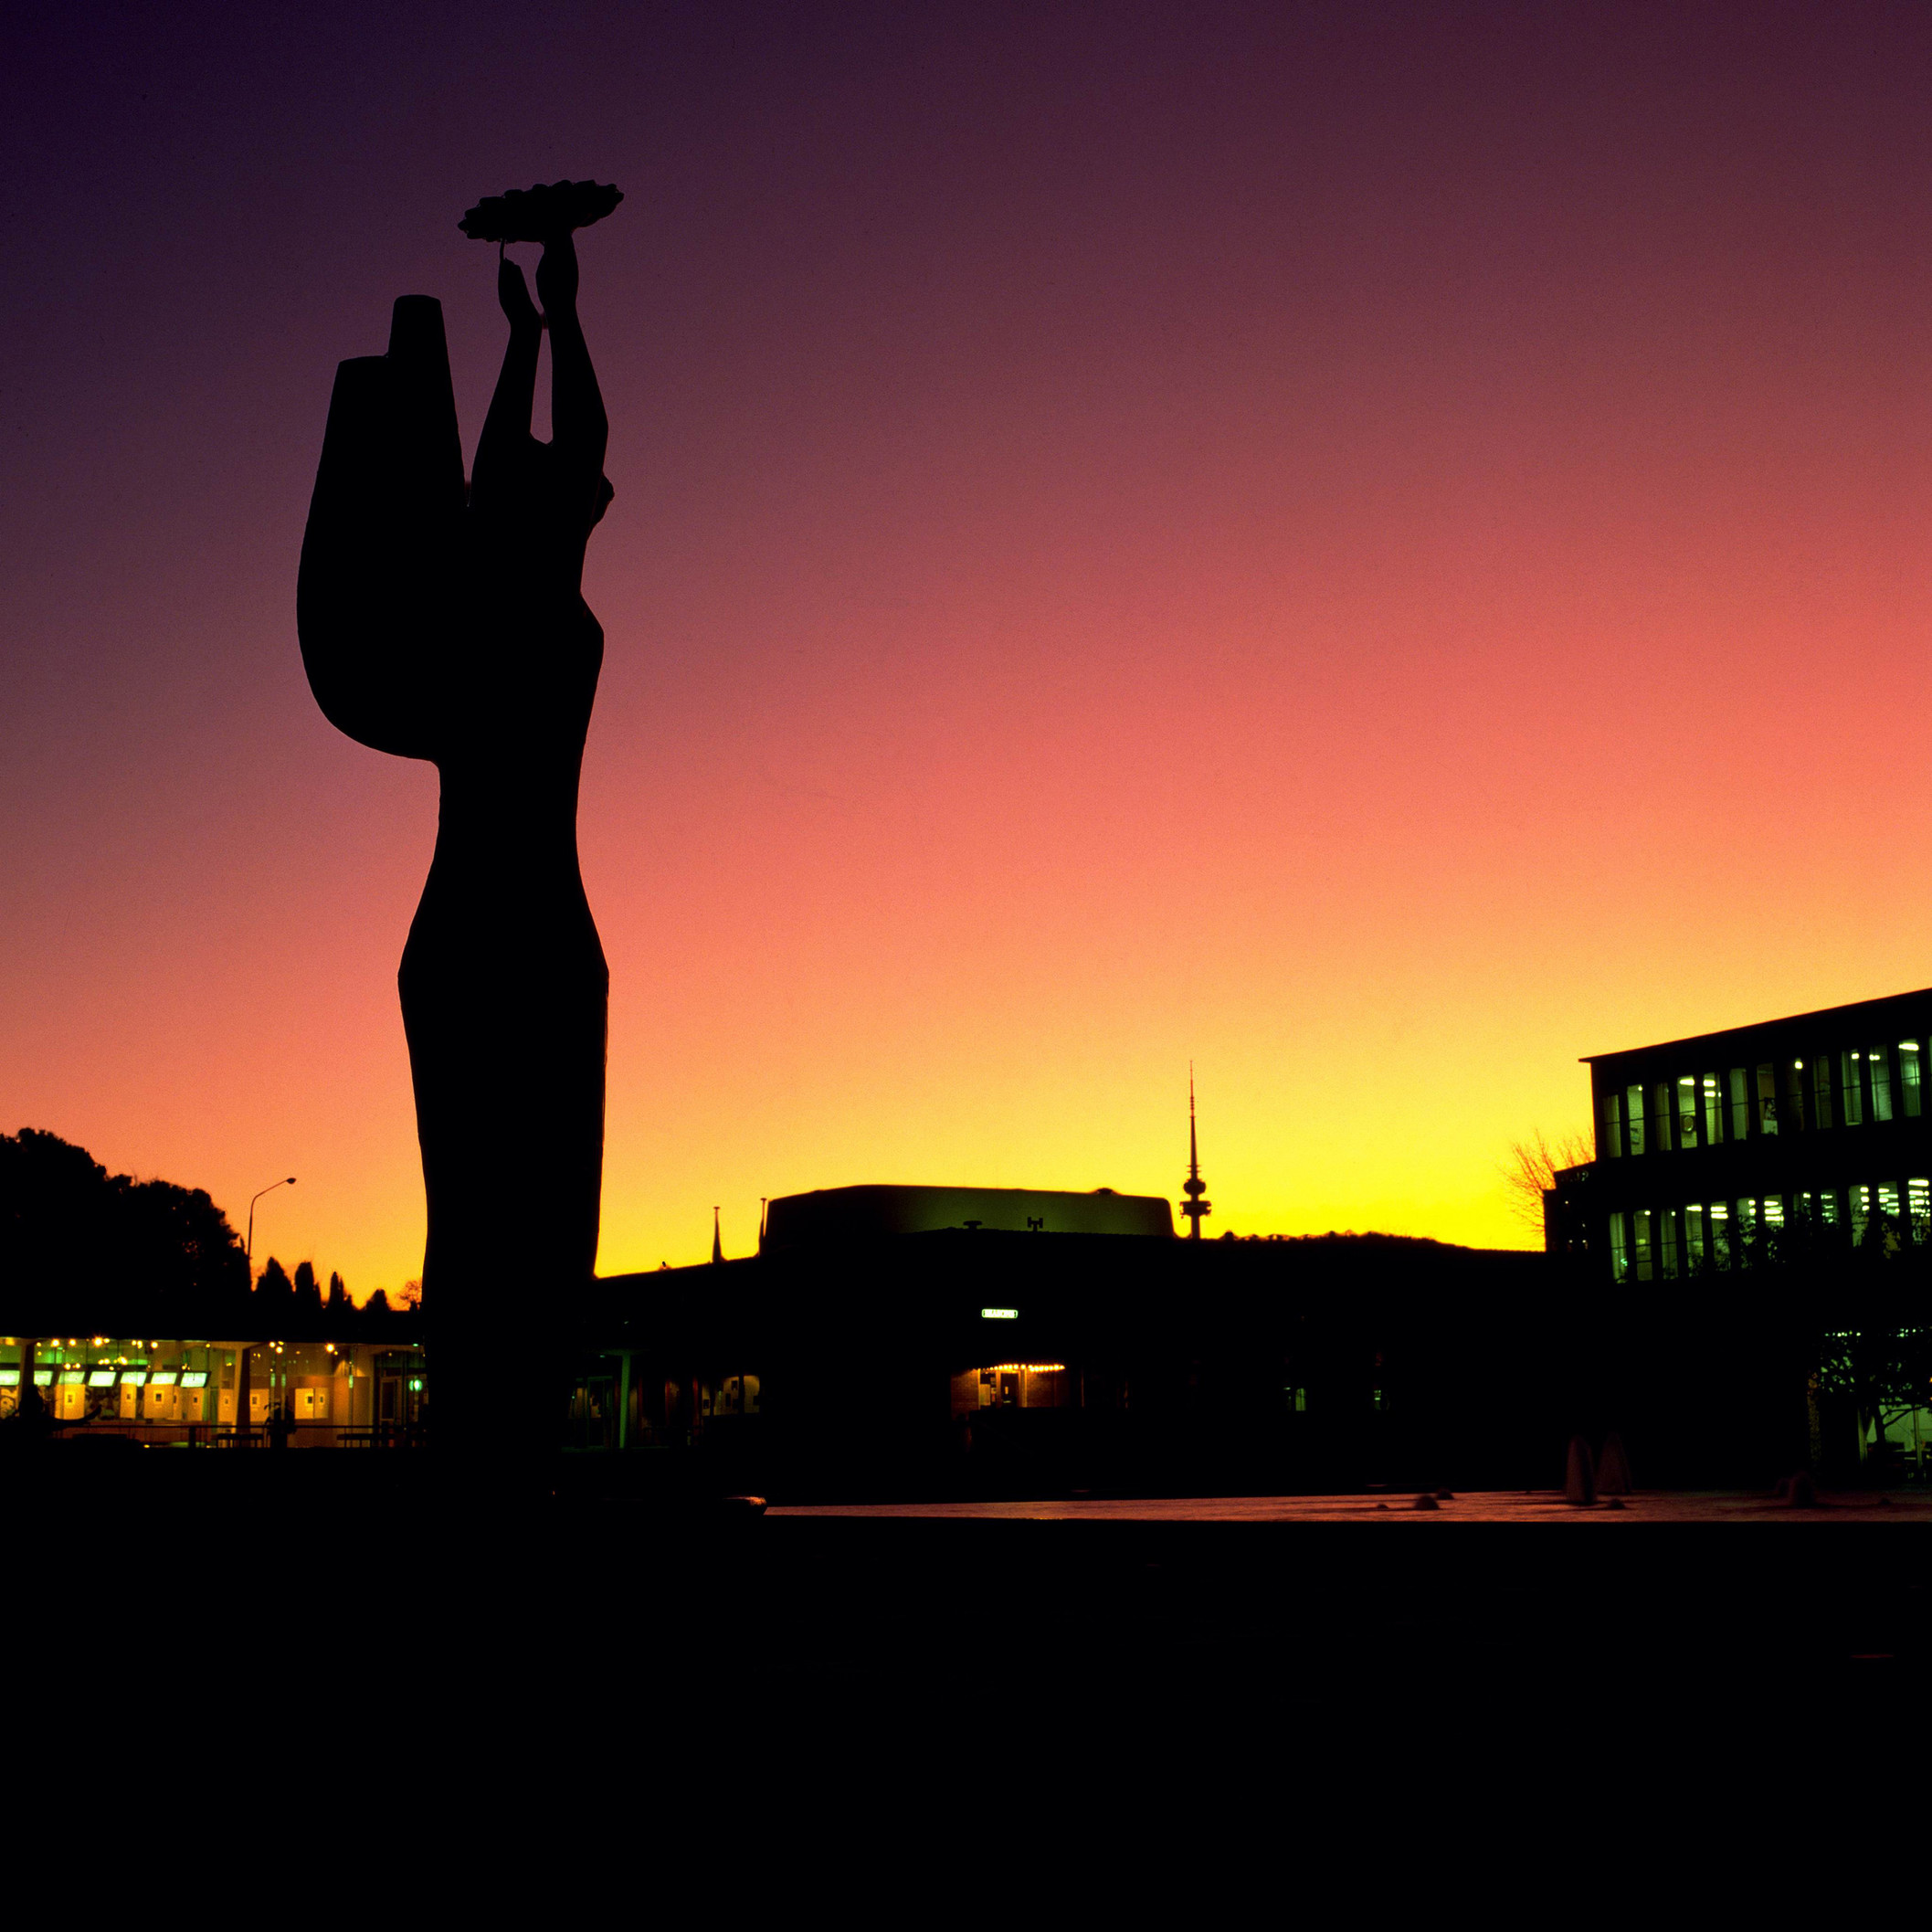 Canberra City at sunset